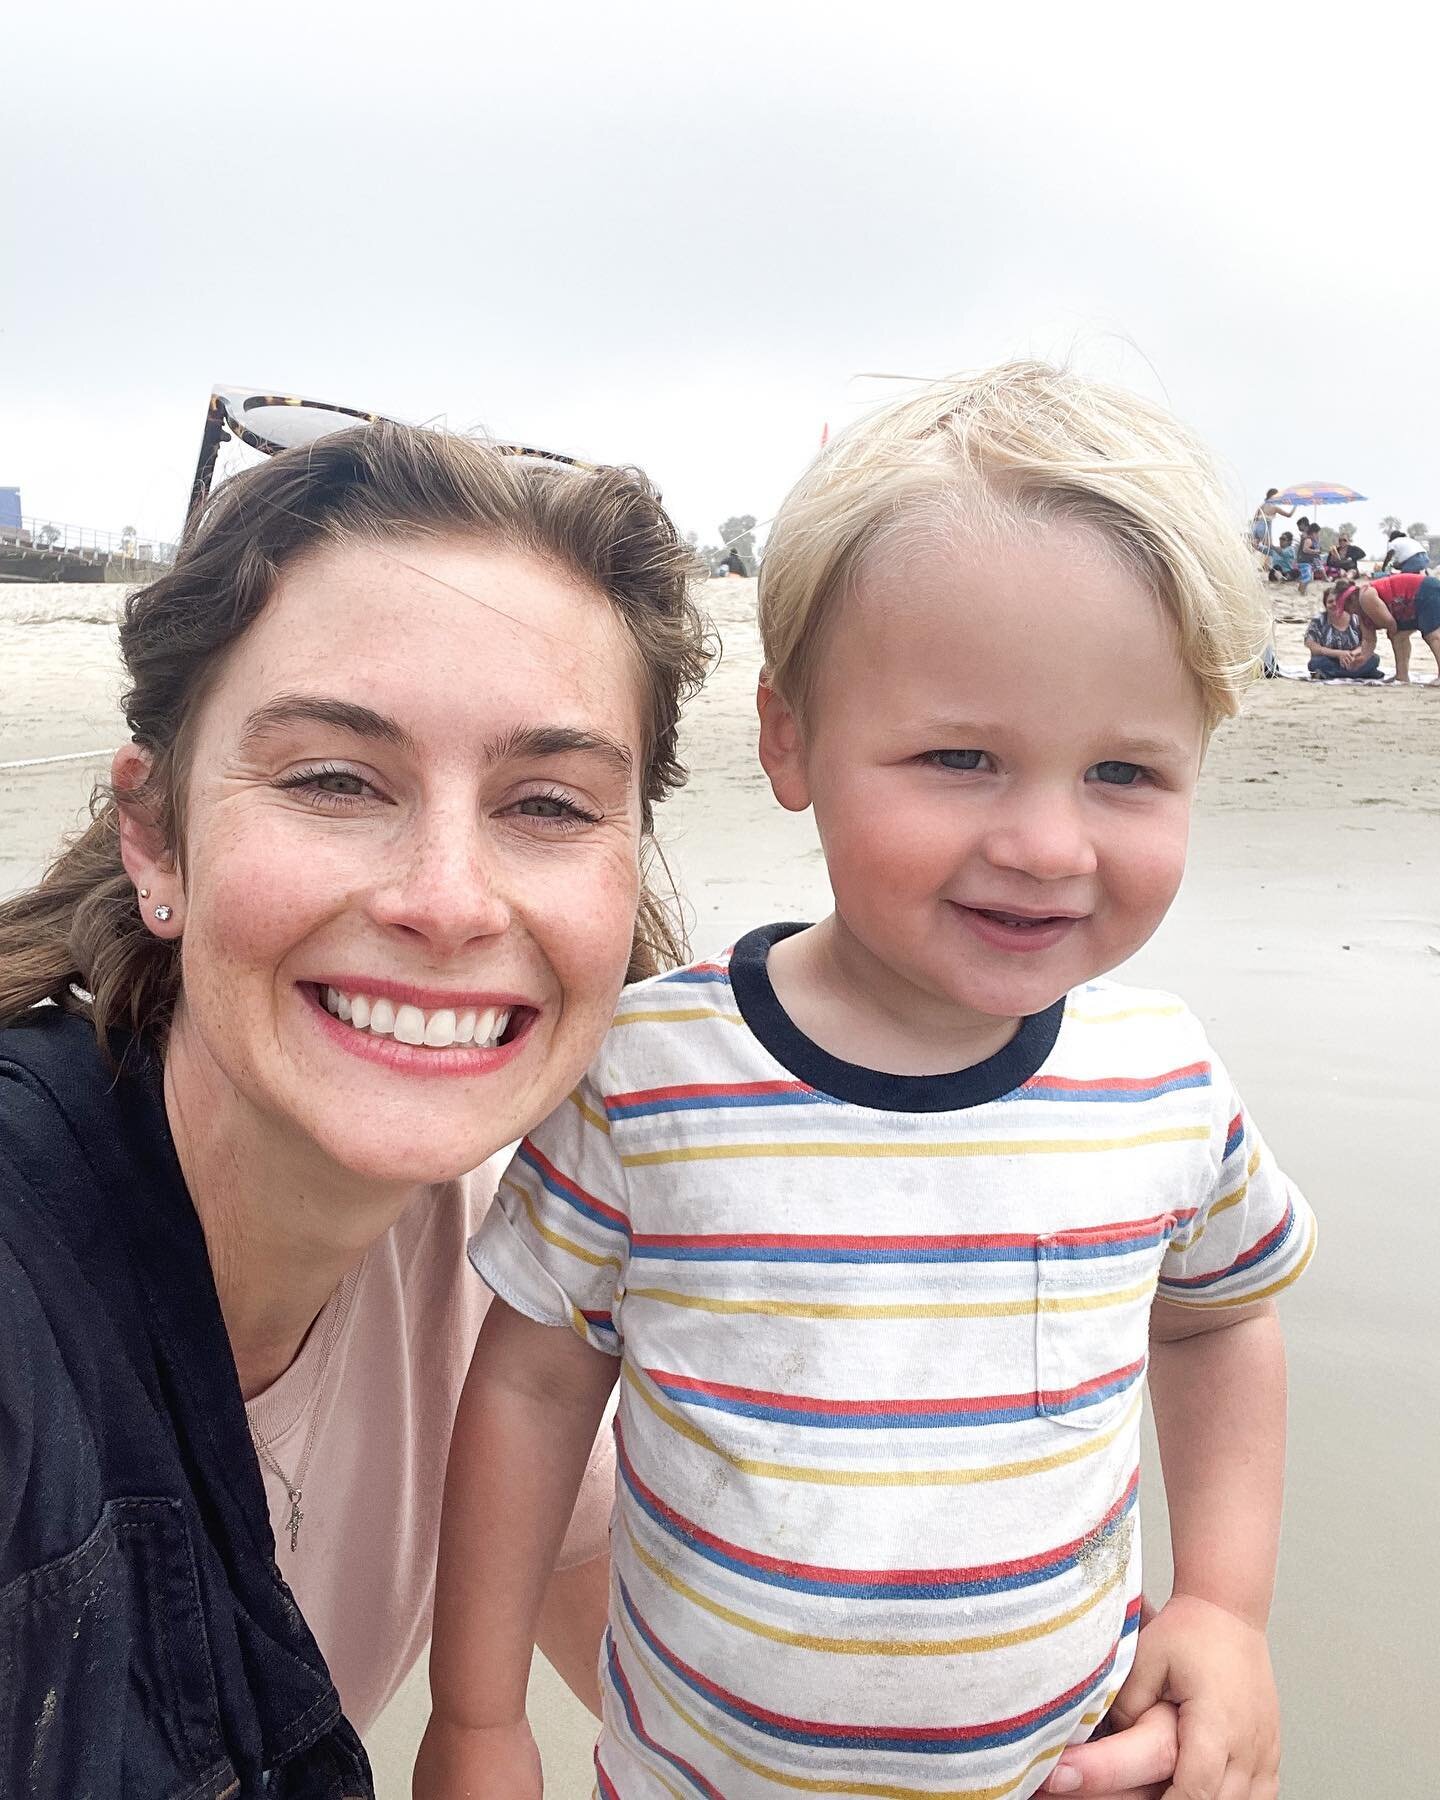 Benny and I had a spur of the moment adventure today to visit our @feel.sunnie friends at @santamonicaplace this morning! Of course it turned into a soaking wet, pants-less beach walk! @feel.sunnie creates all organic kids lunches, and now snacks, th